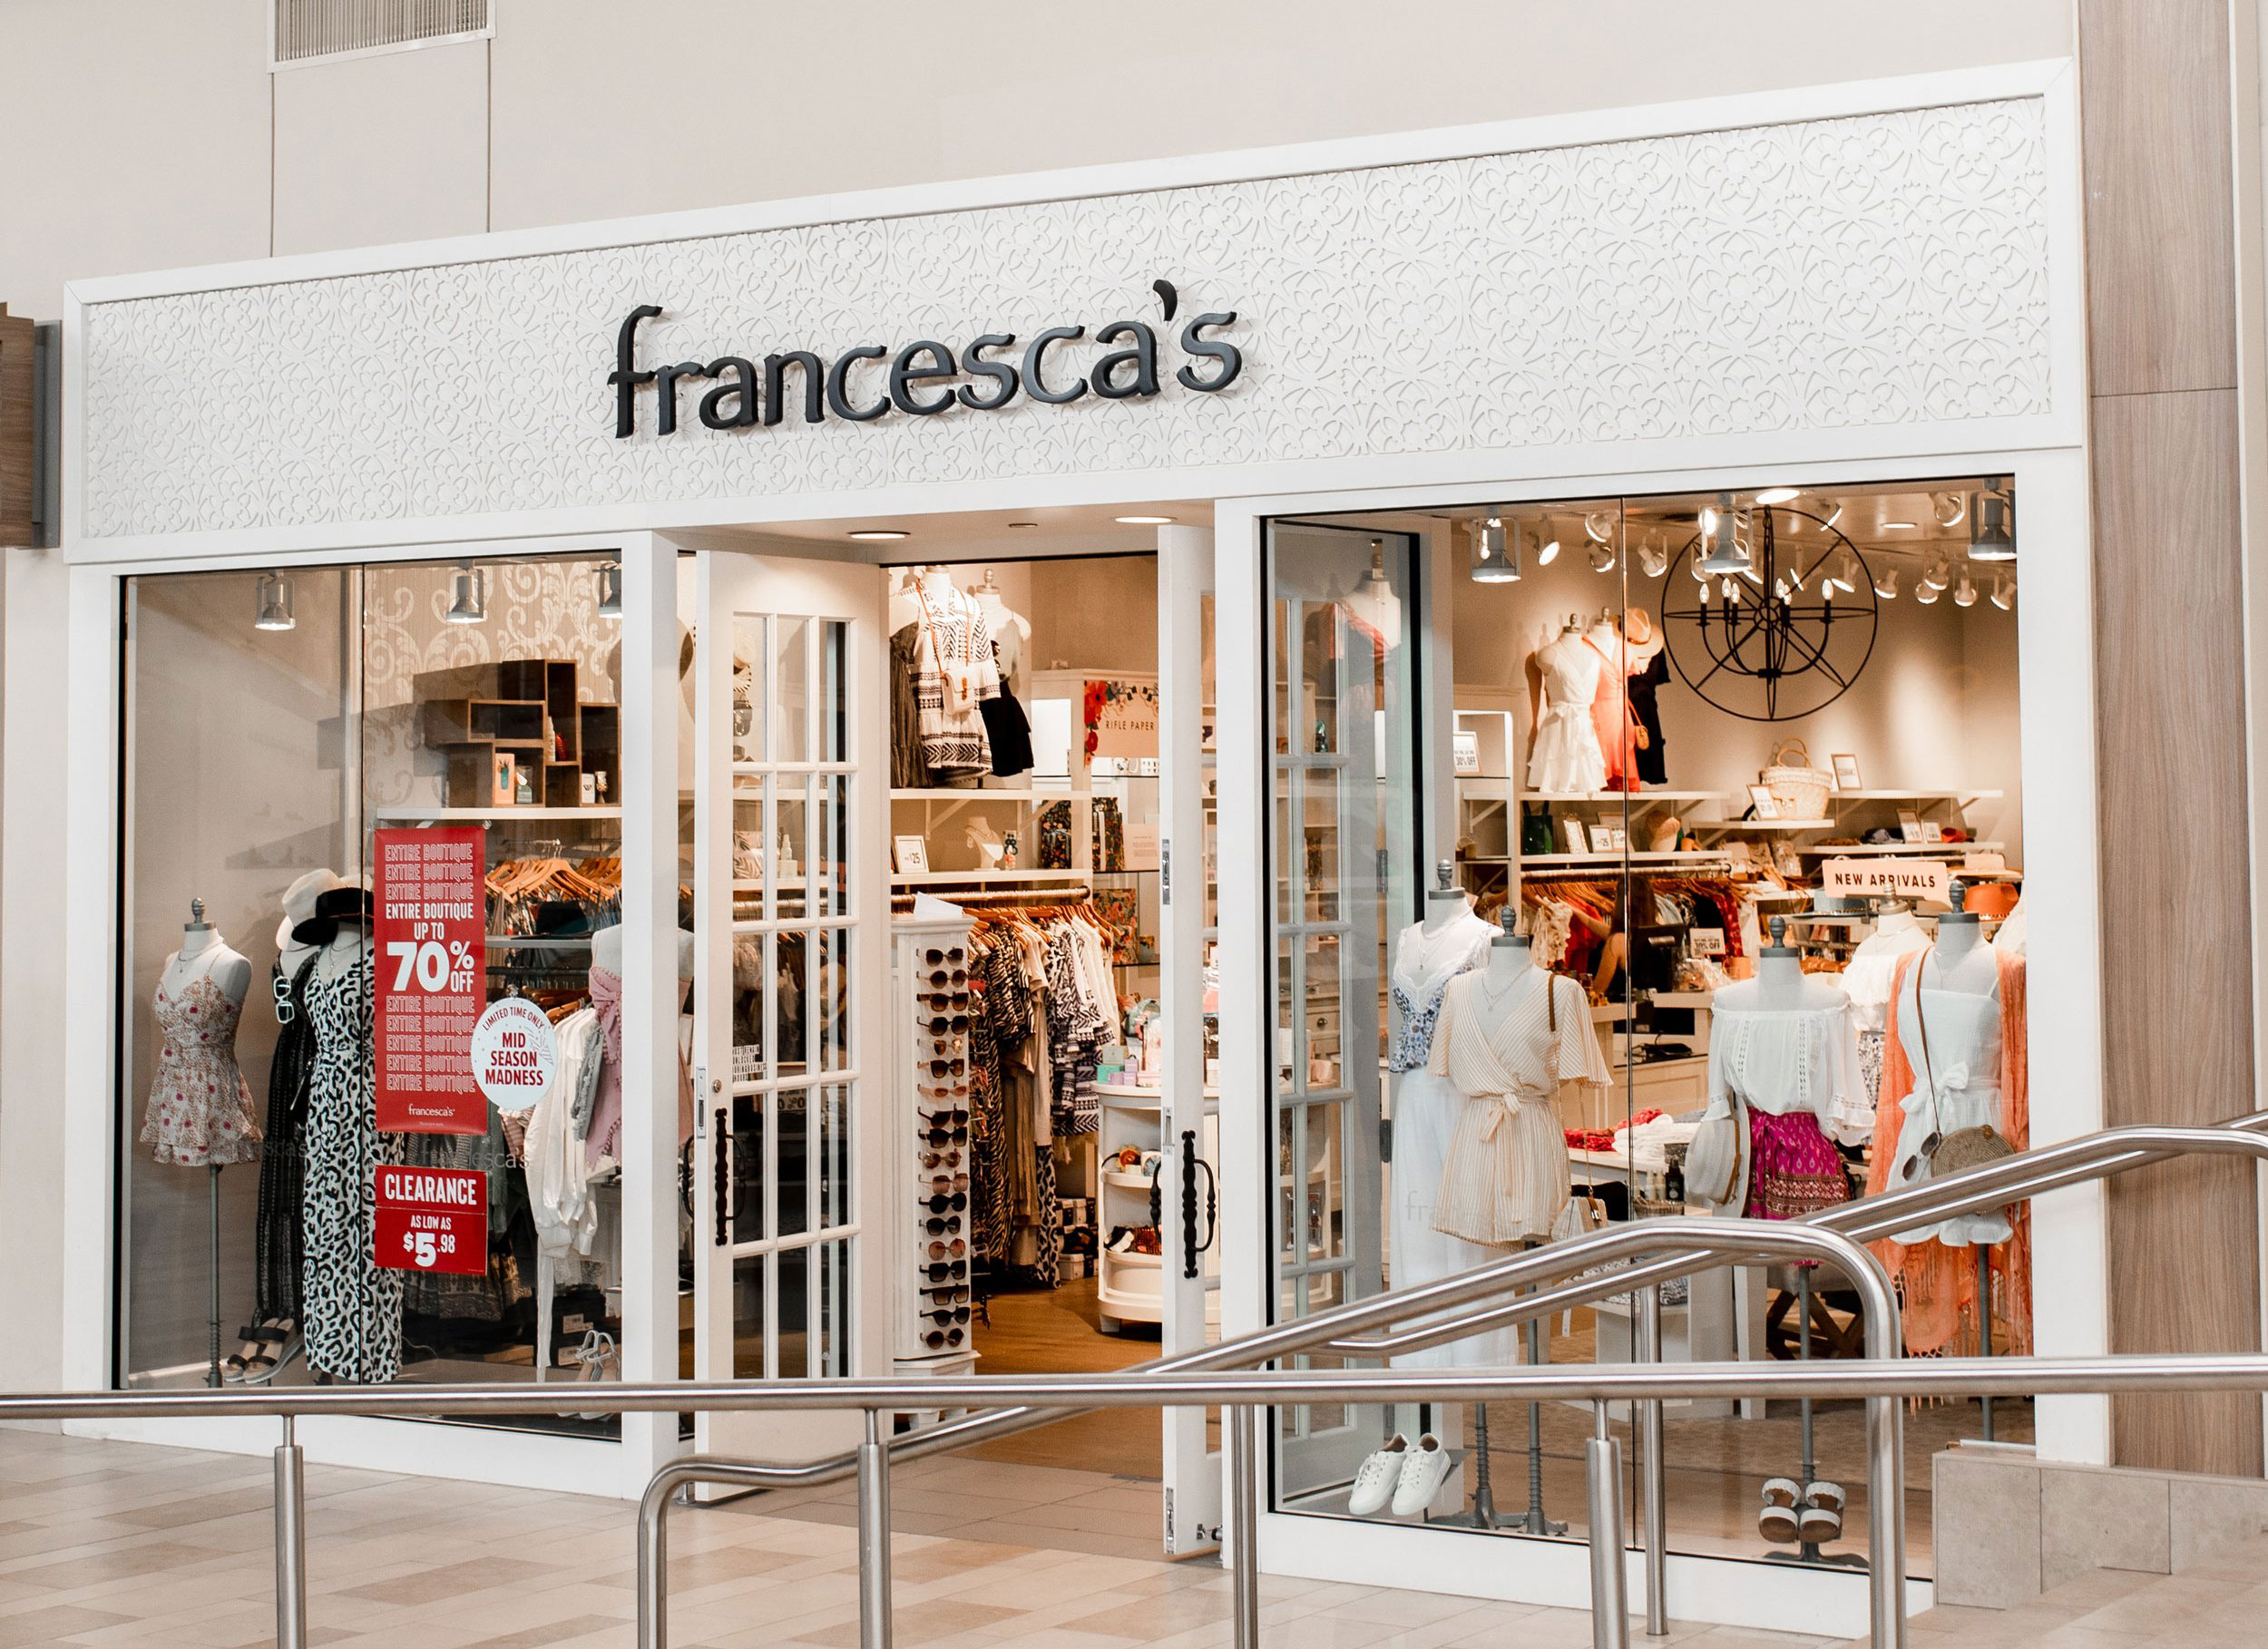 Francesca's store might be last to debut with new mall